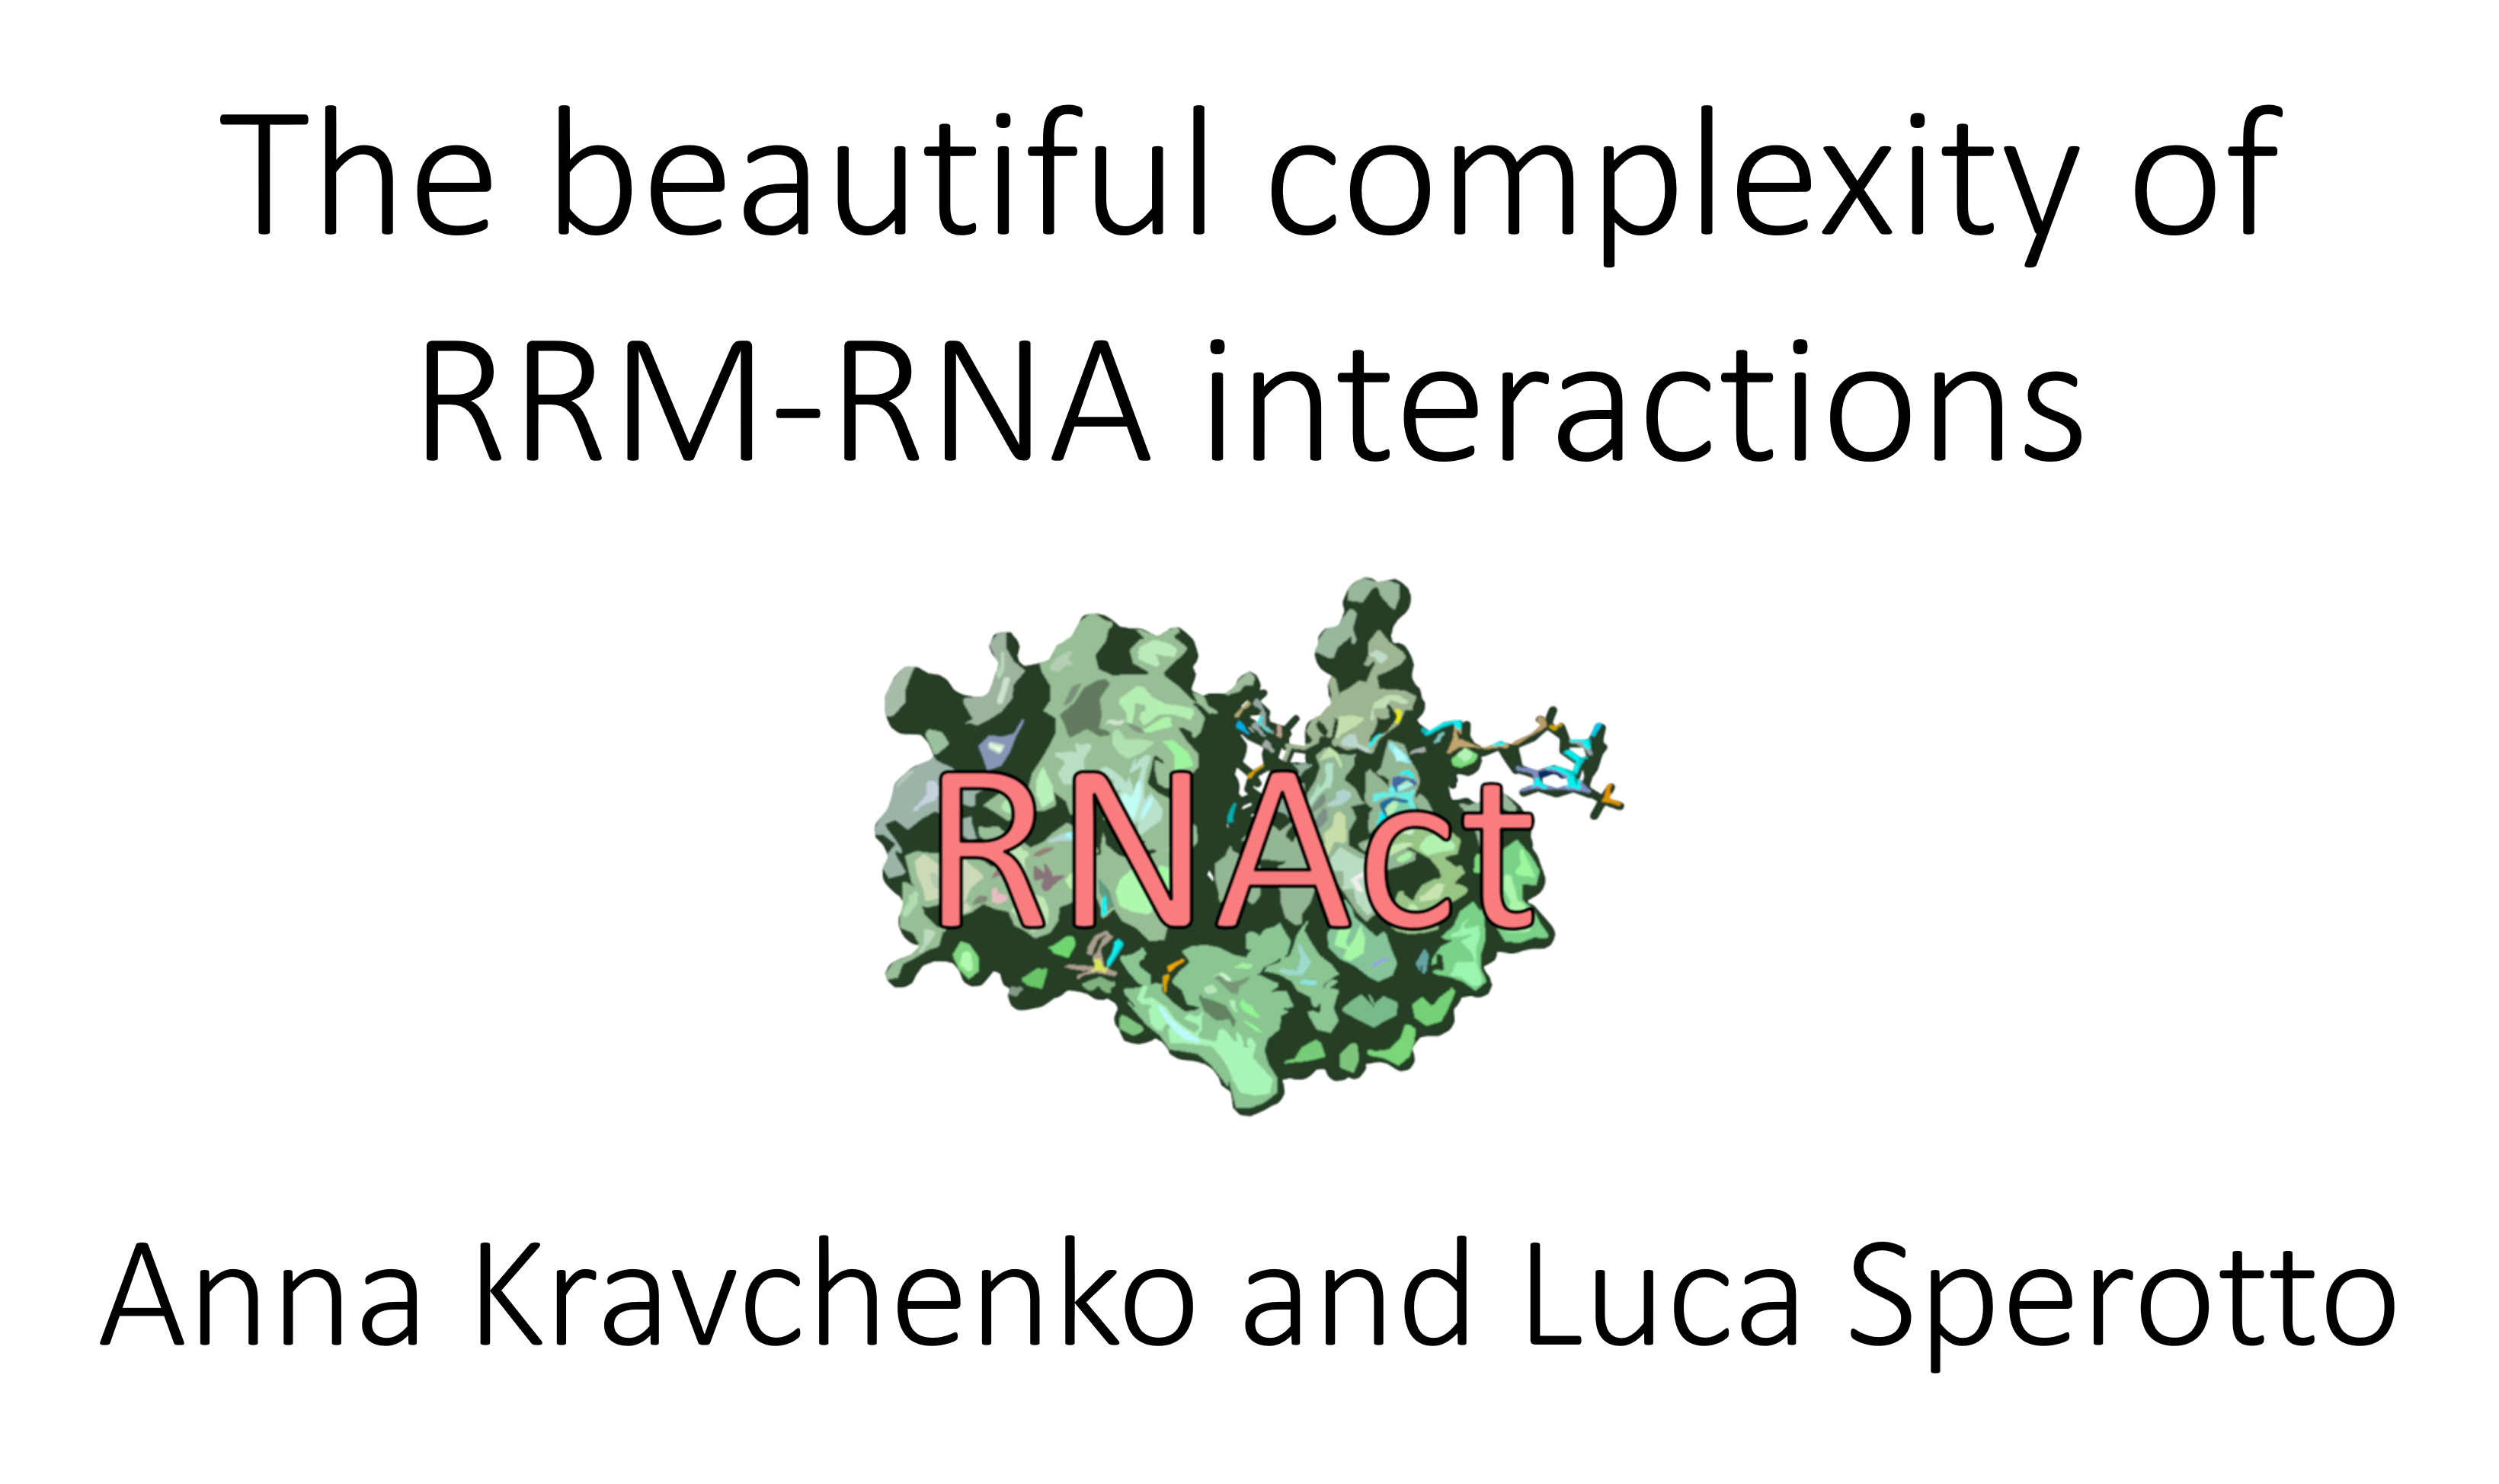 The beautiful complexity of RRM-RNA interactions